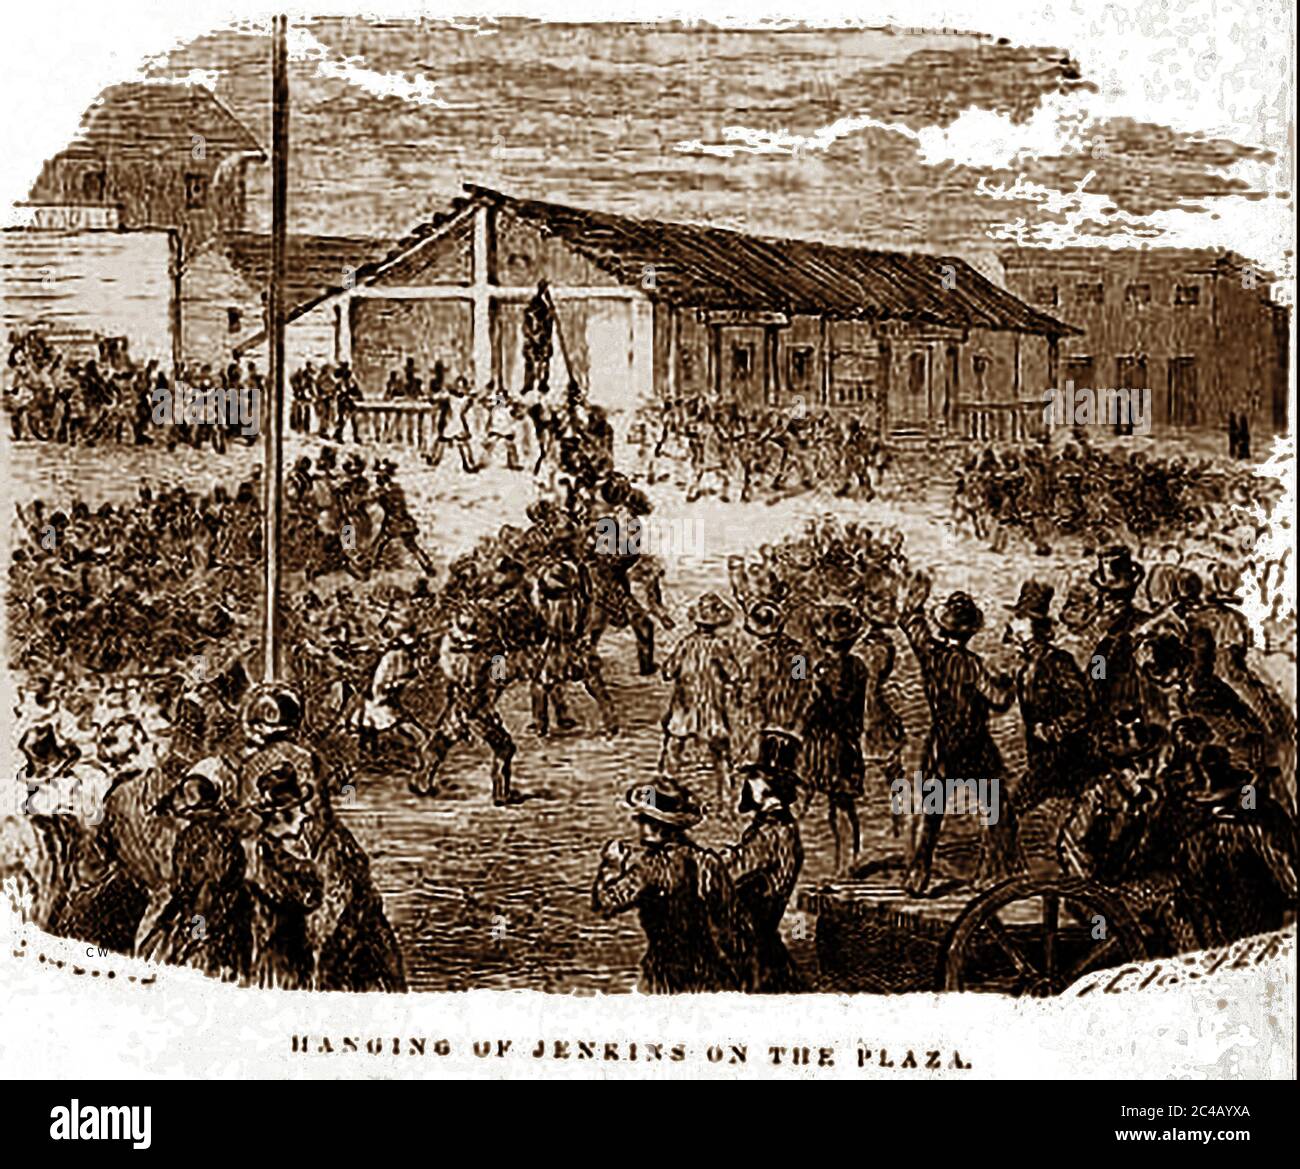 A 19th century public lynching in California (According to the Tuskegee Institute, 4,743 people were lynched between 1882 and 1968 in the United States, most taking place between 1890 and  the 1920s, with a peak year being  1892) Stock Photo